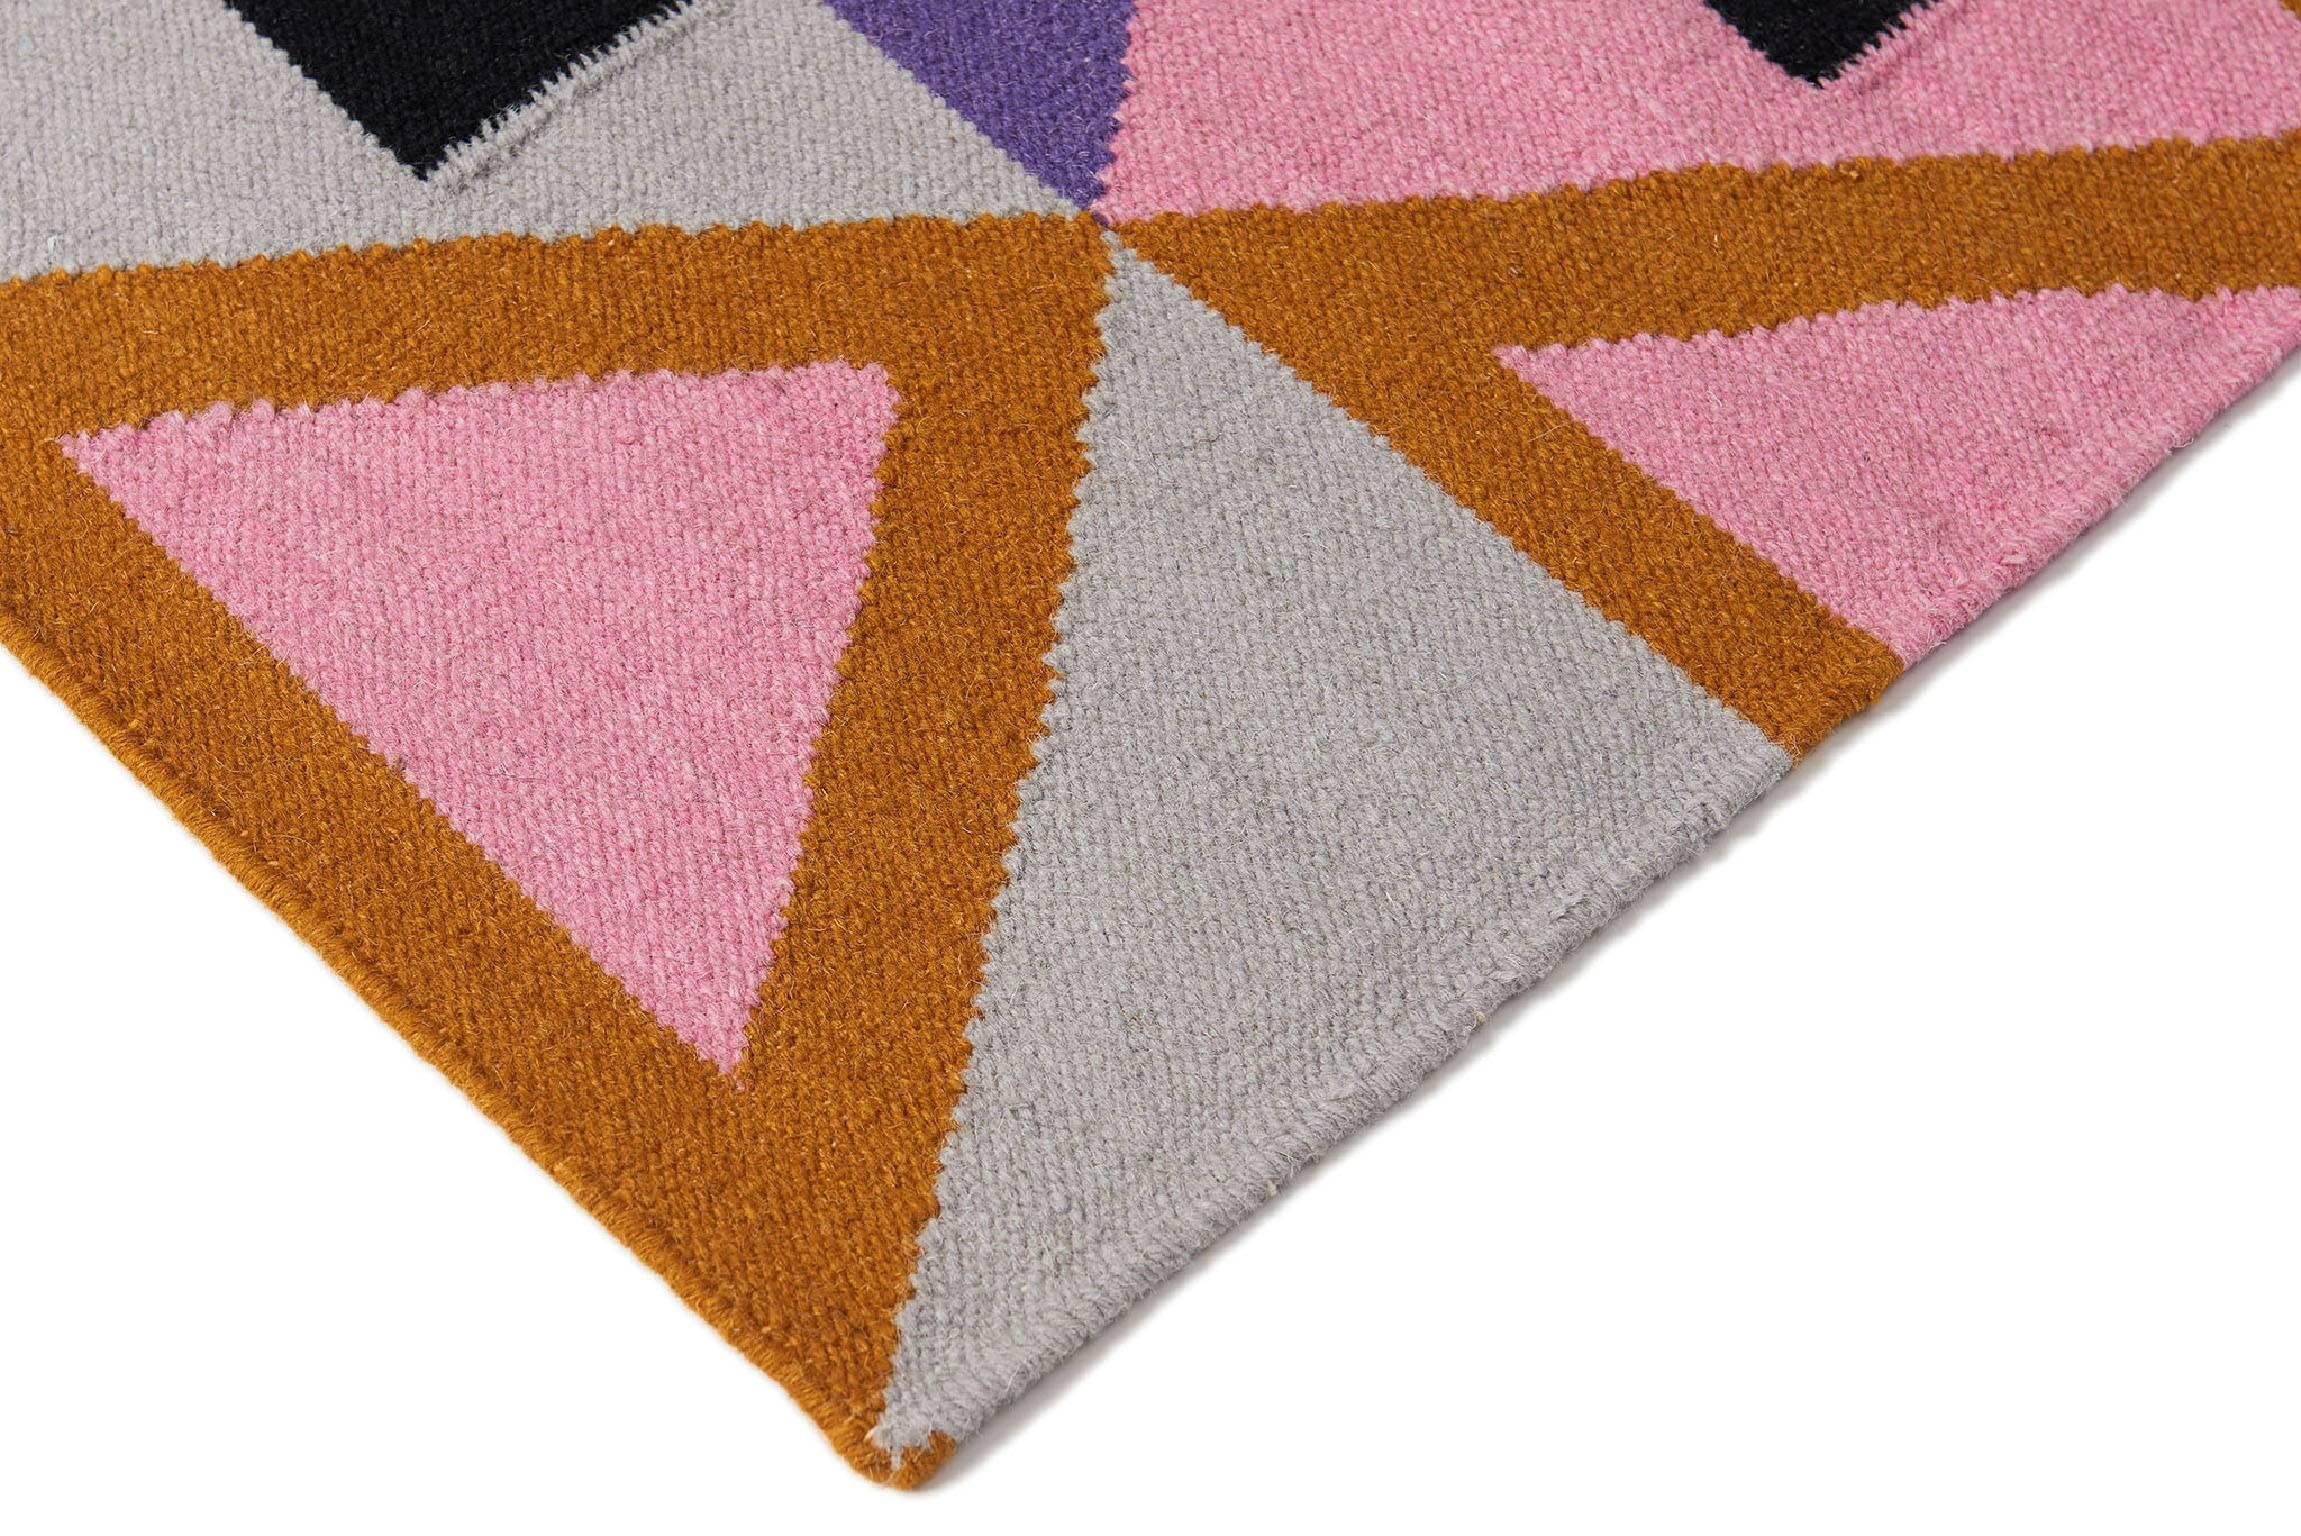 Modern, functional, sustainable. Make a statement with the Morgan design. It's is bold, colorful and unique. A geometric handwoven wool Dhurrie rug with a modern fresh approach. Designed by Aelfie.